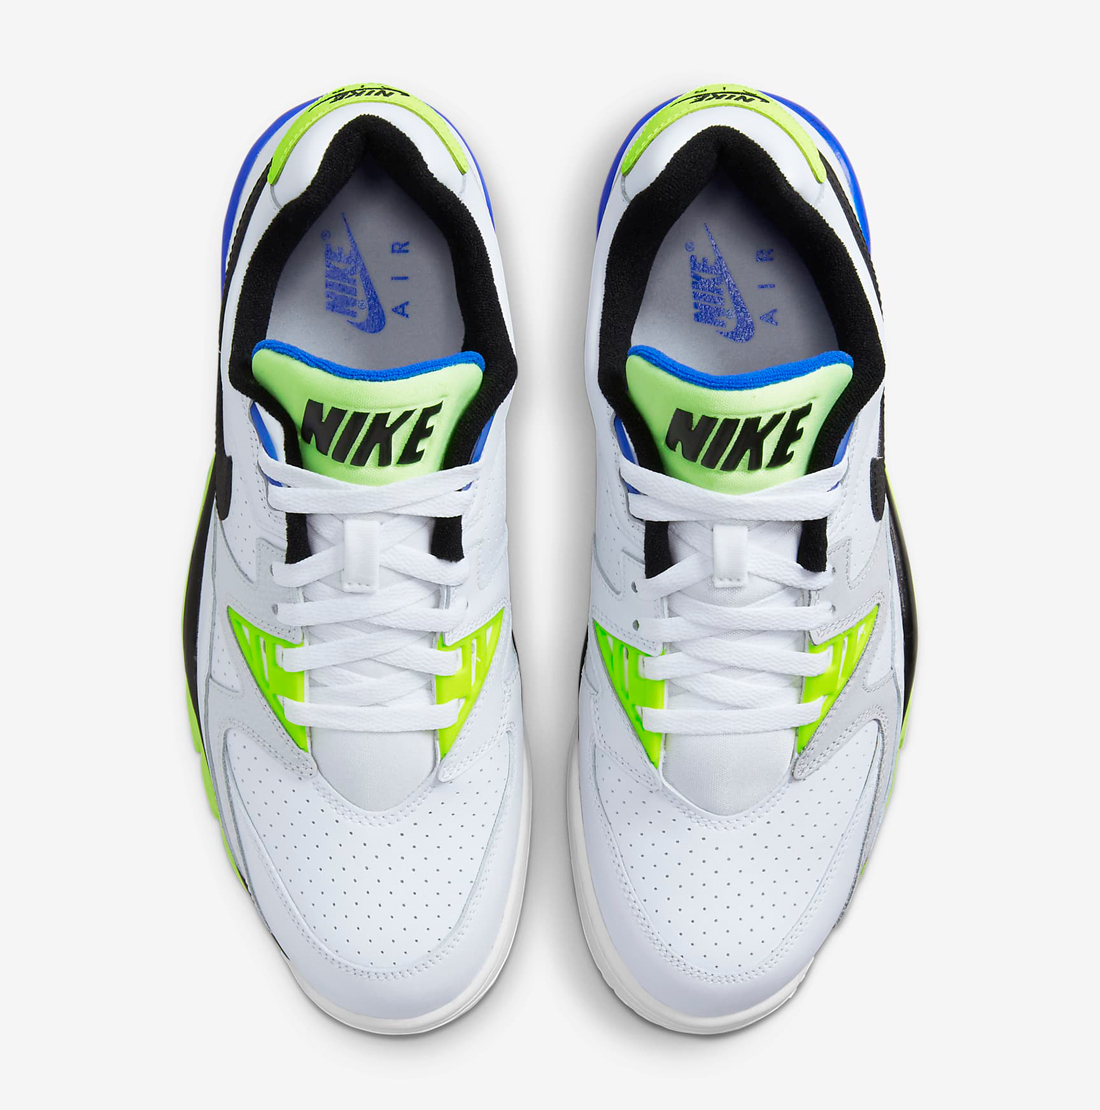 Nike-Air-Cross-Trainer-3-Low-White-Racer-Blue-Volt-Release-Date-Info-4